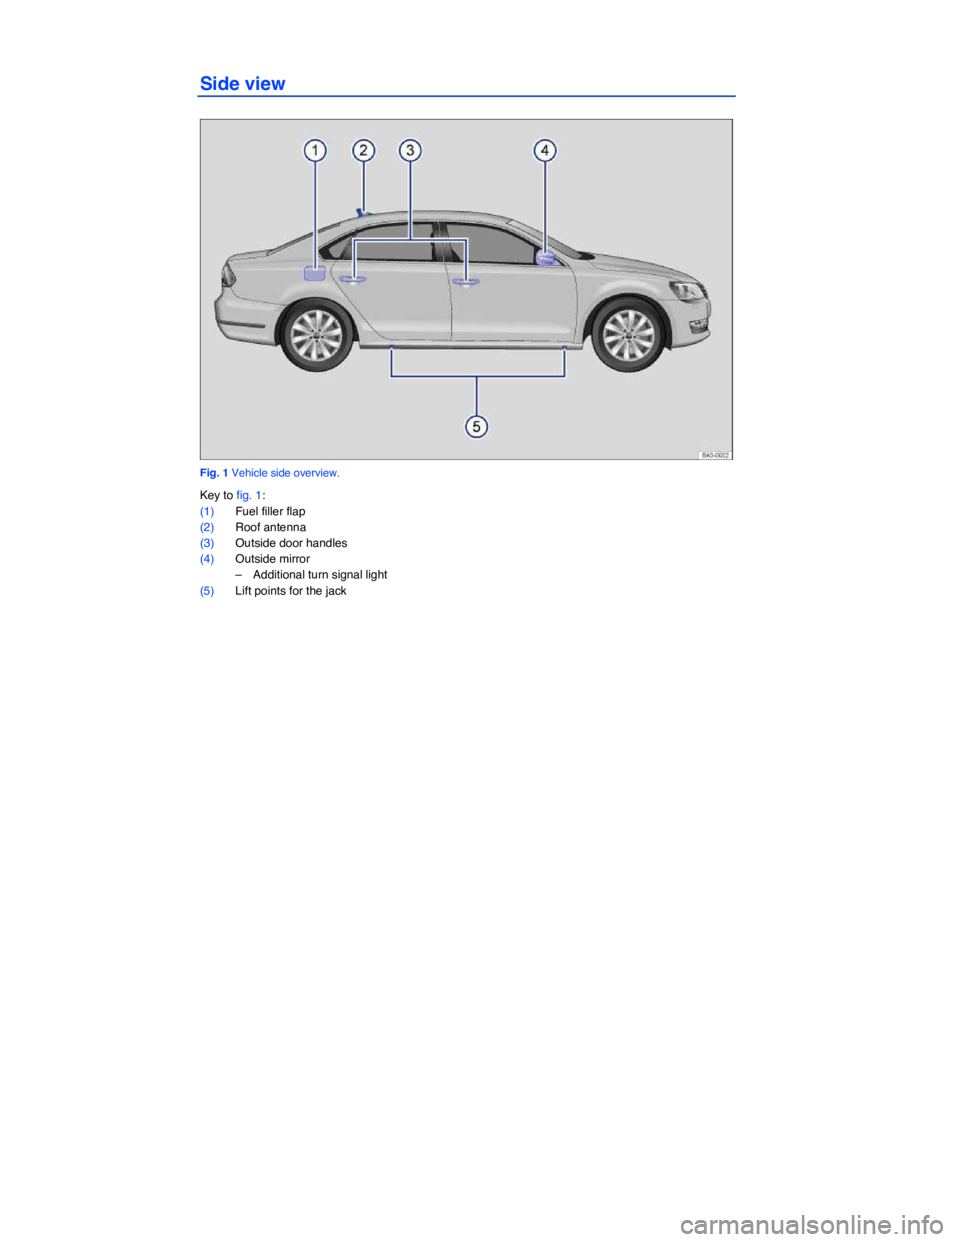 VOLKSWAGEN PASSAT 2013  Owners Manual  
Side view 
 
Fig. 1 Vehicle side overview. 
Key to fig. 1: 
(1) Fuel filler flap  
(2) Roof antenna  
(3) Outside door handles  
(4) Outside mirror  
–  Additional turn signal light  
(5) Lift poi